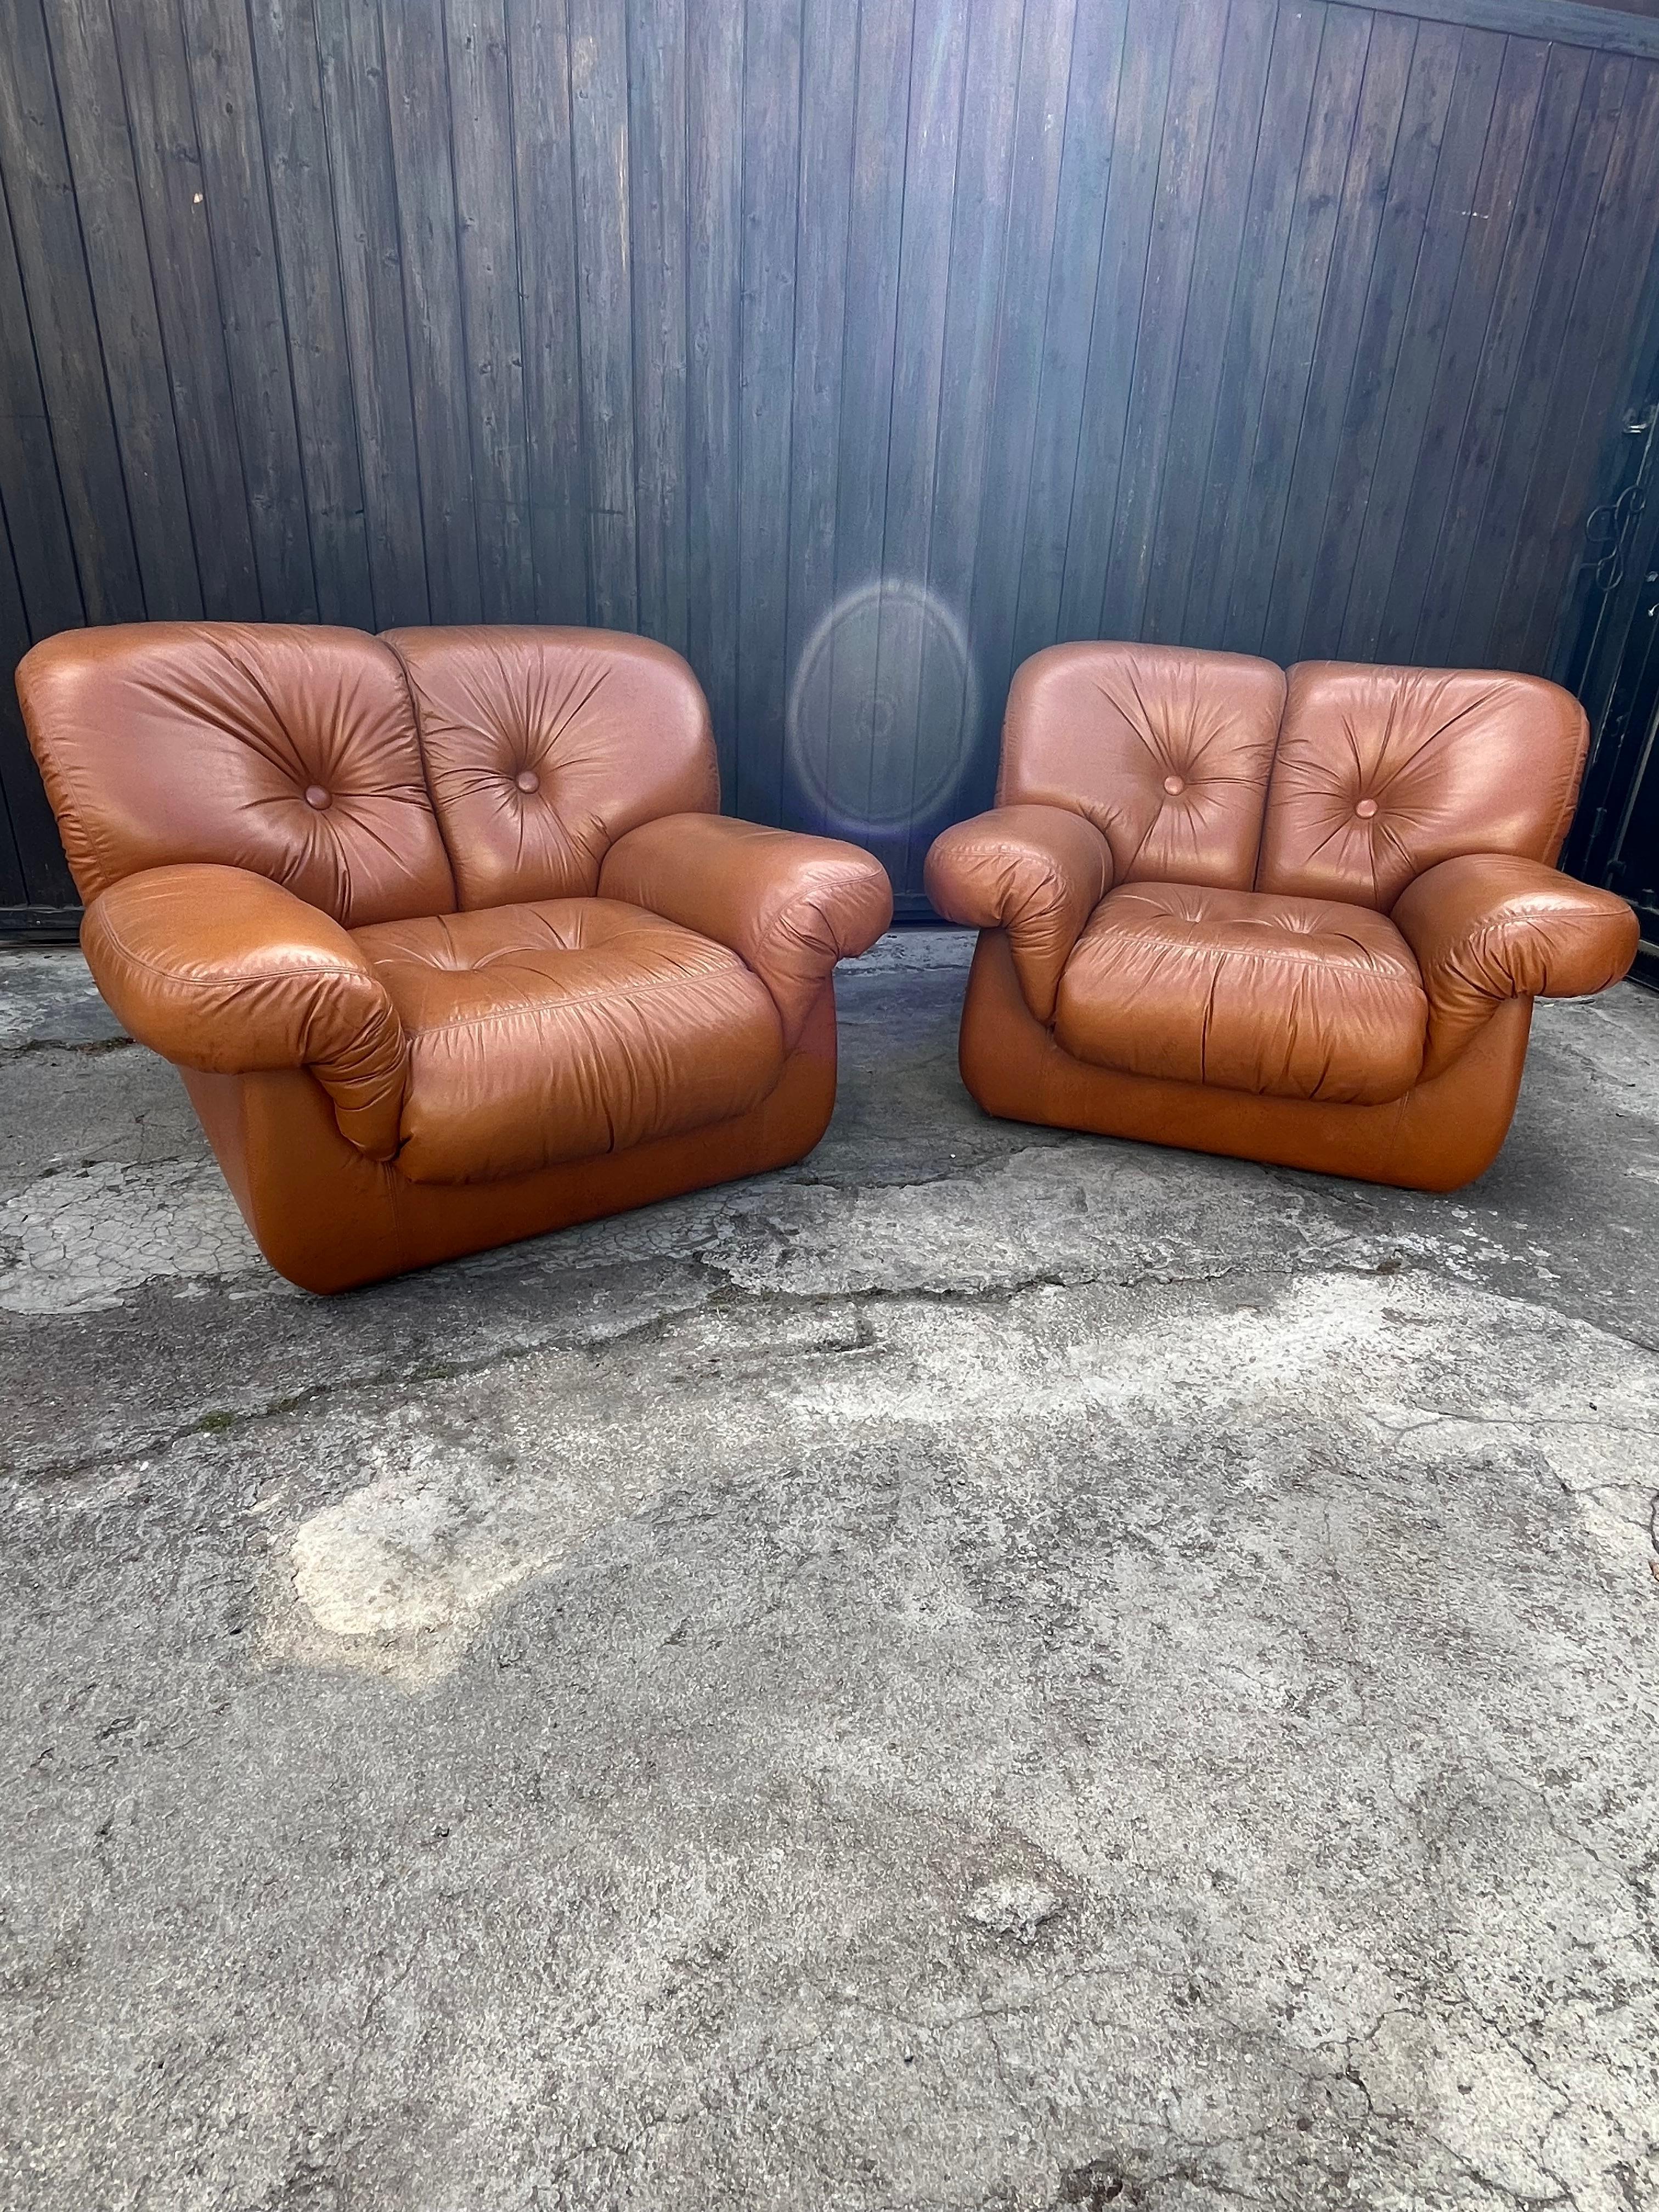 Set of 2 Mid-Century Armchairs in cognac leather, Italian design 1970s
Intact and in good condition, small signs of aging.
Little used, found in a notary's office in my city.
